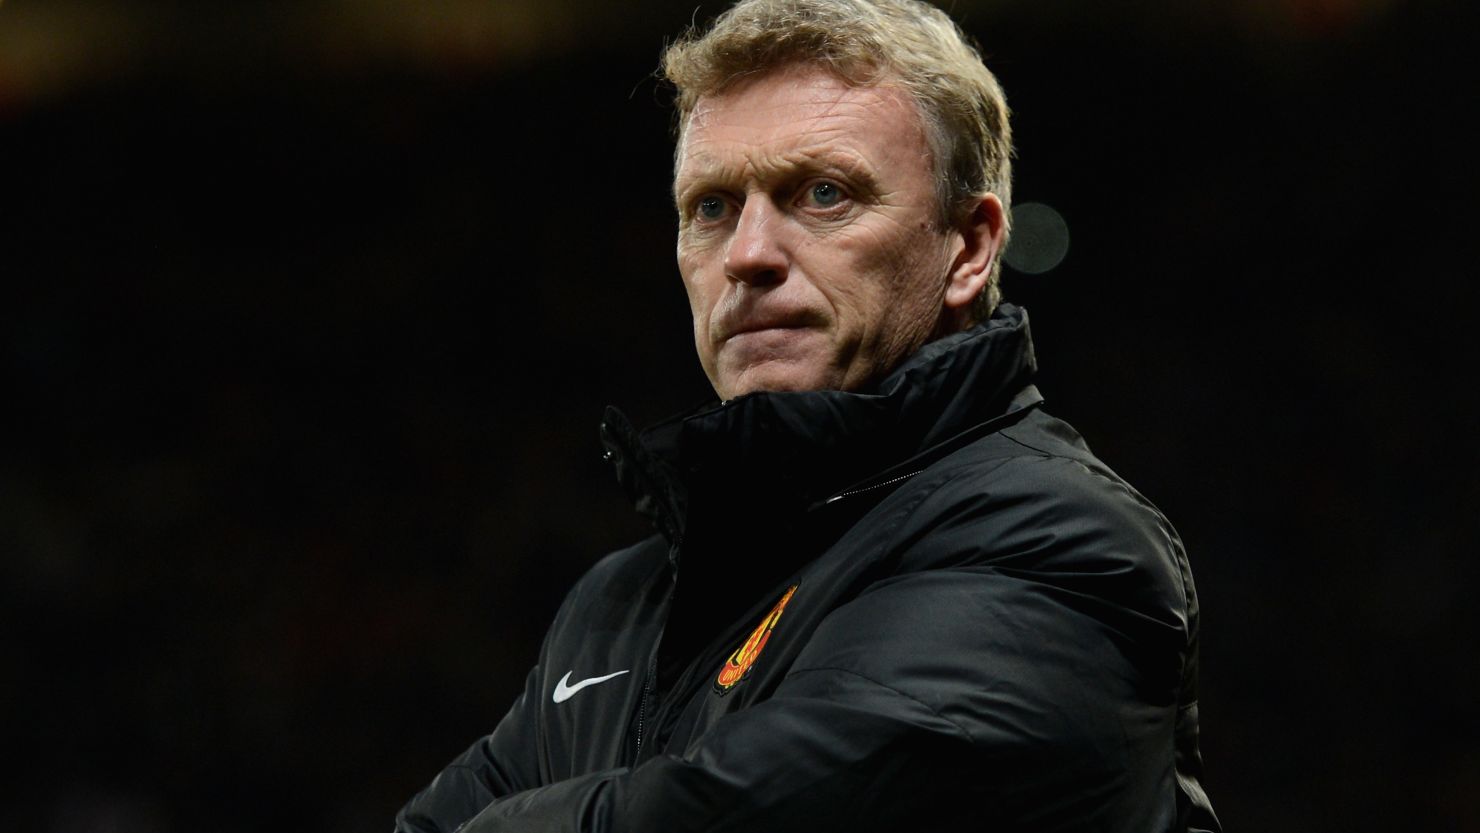 Manchester United manager David Moyes endured a night to forget after his team was beaten by Everton.